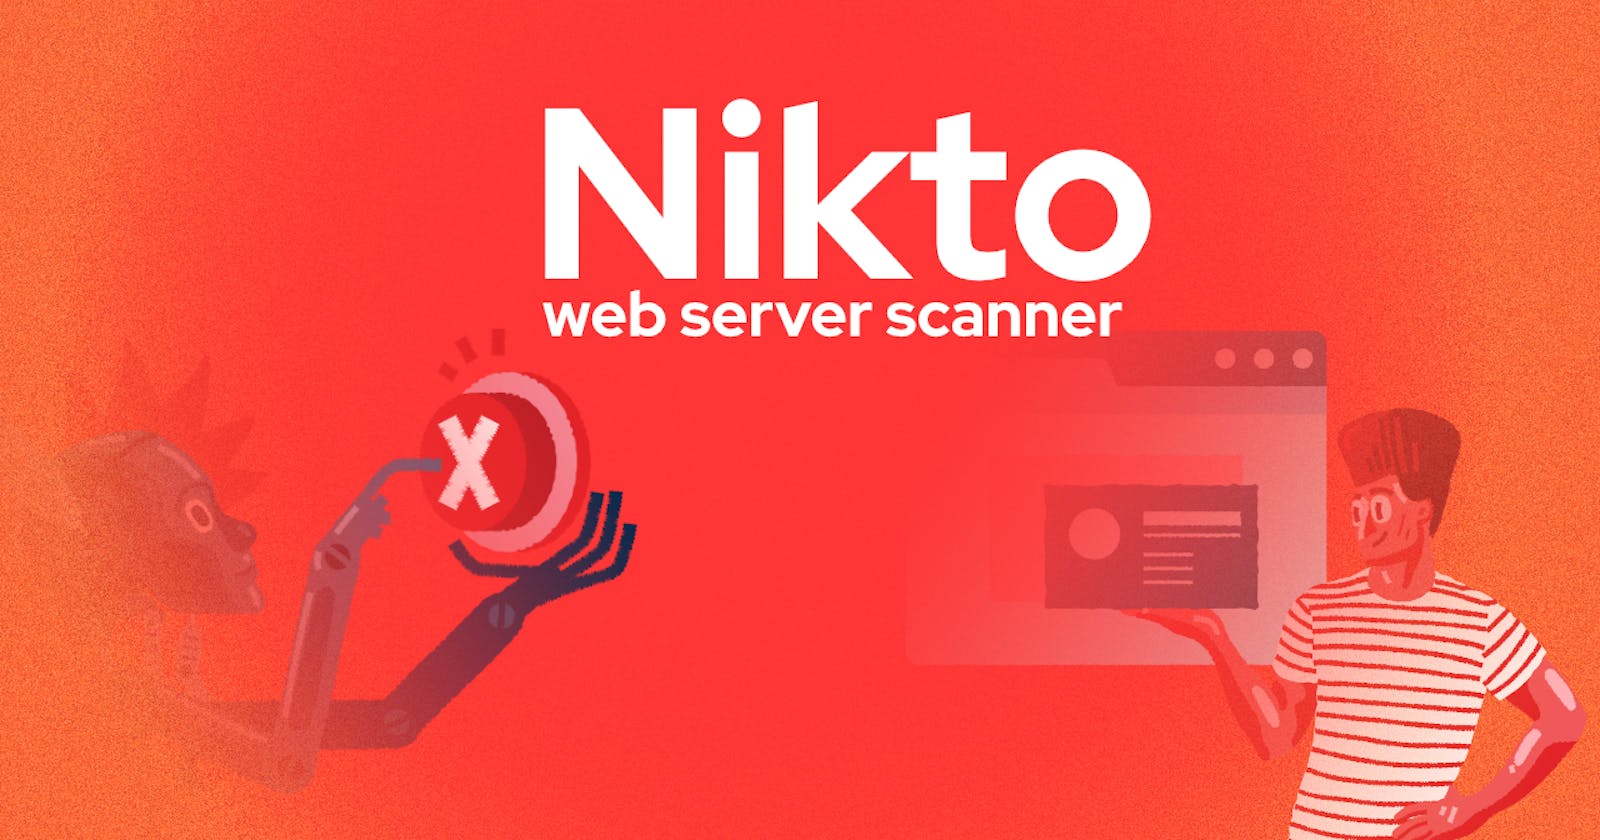 Finding Technical Weakness with Nikto